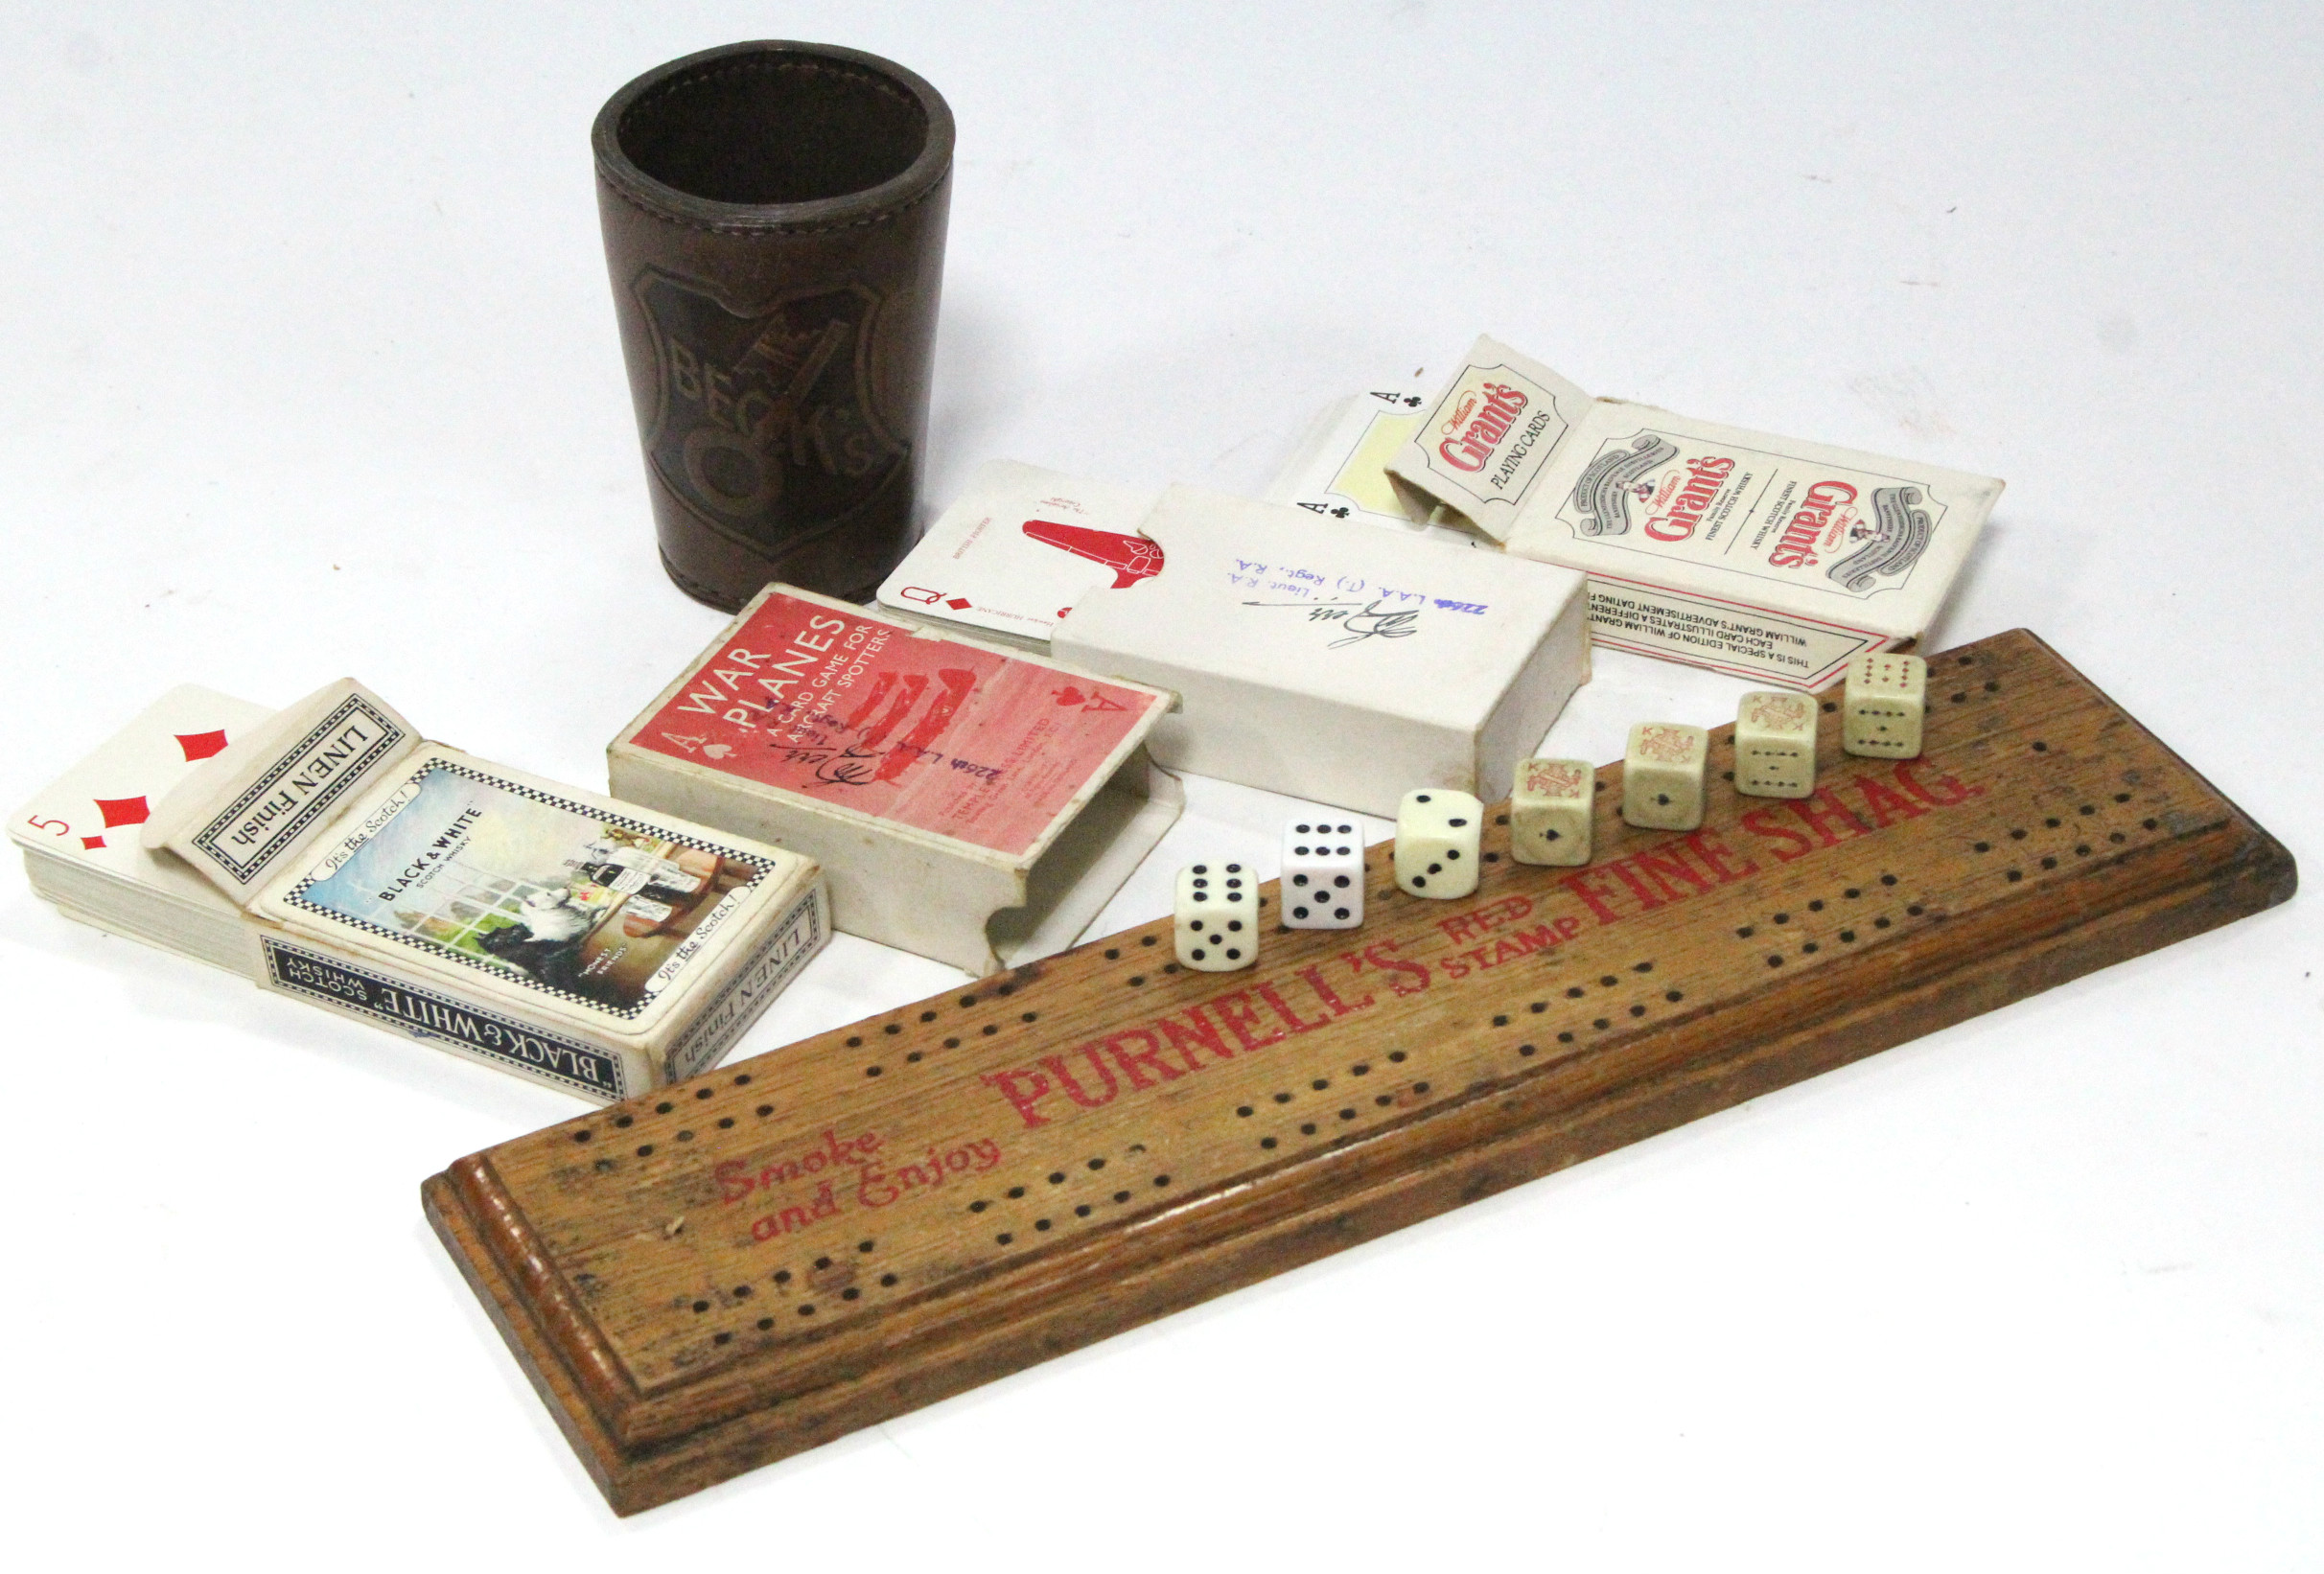 A “Purnells Red Stamp Fine Shag” a wooden cribbage board; three sets of playing cards; & a leather